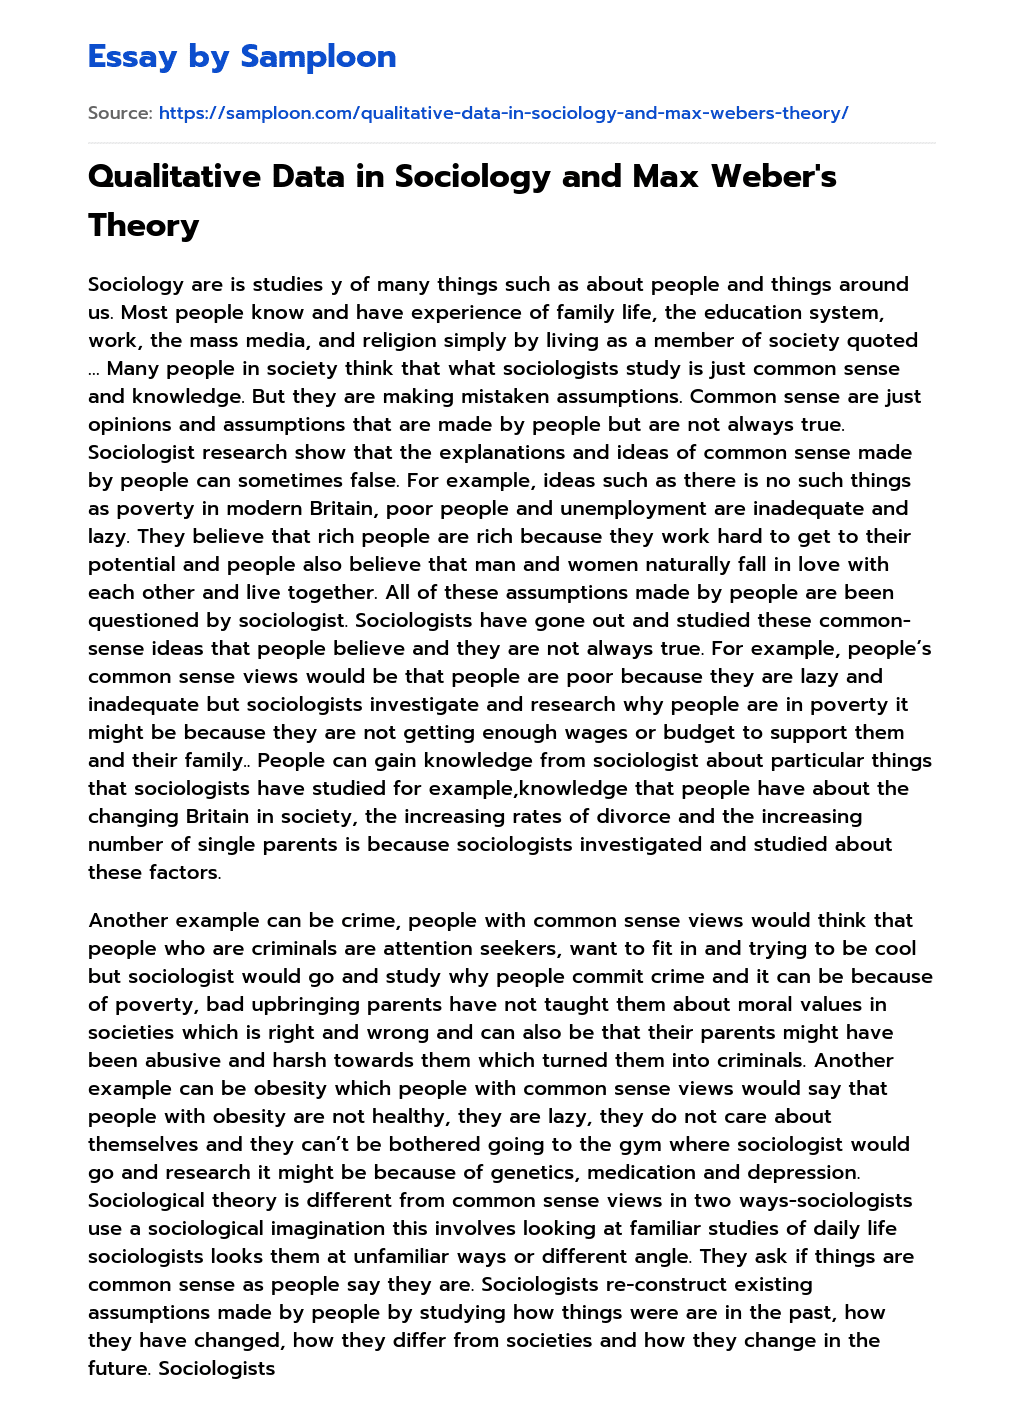 Qualitative Data in Sociology and Max Weber’s Theory essay